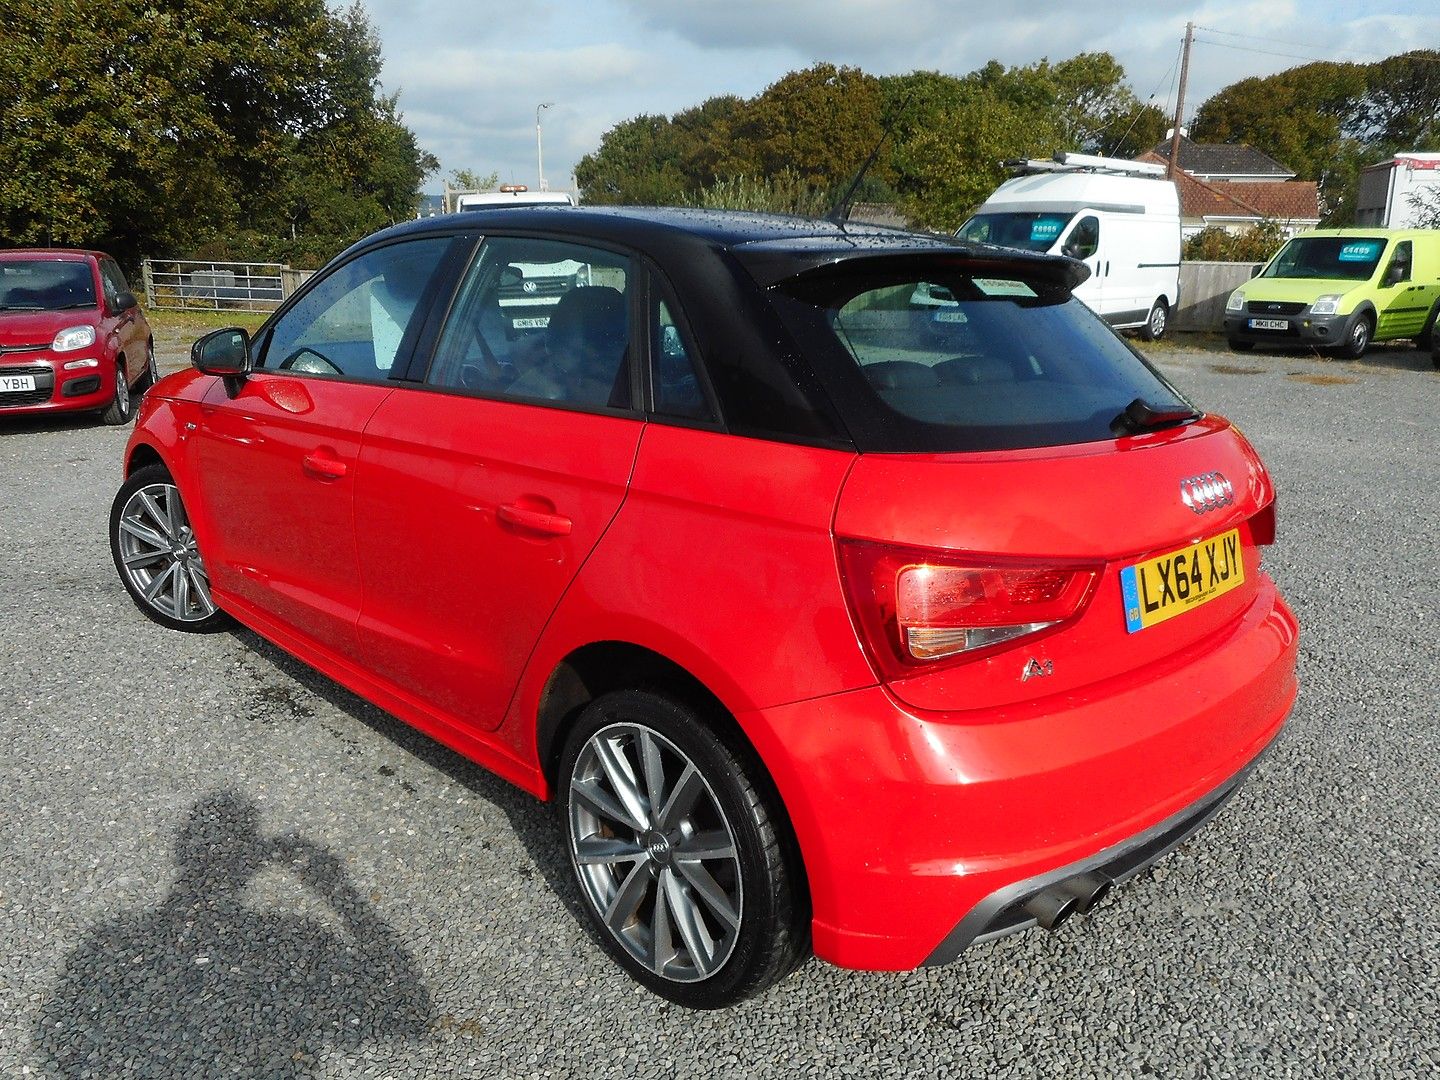 AUDI A1 Sportback 1.4 TFSI S line Style Edition 122PS (2014) - Picture 4